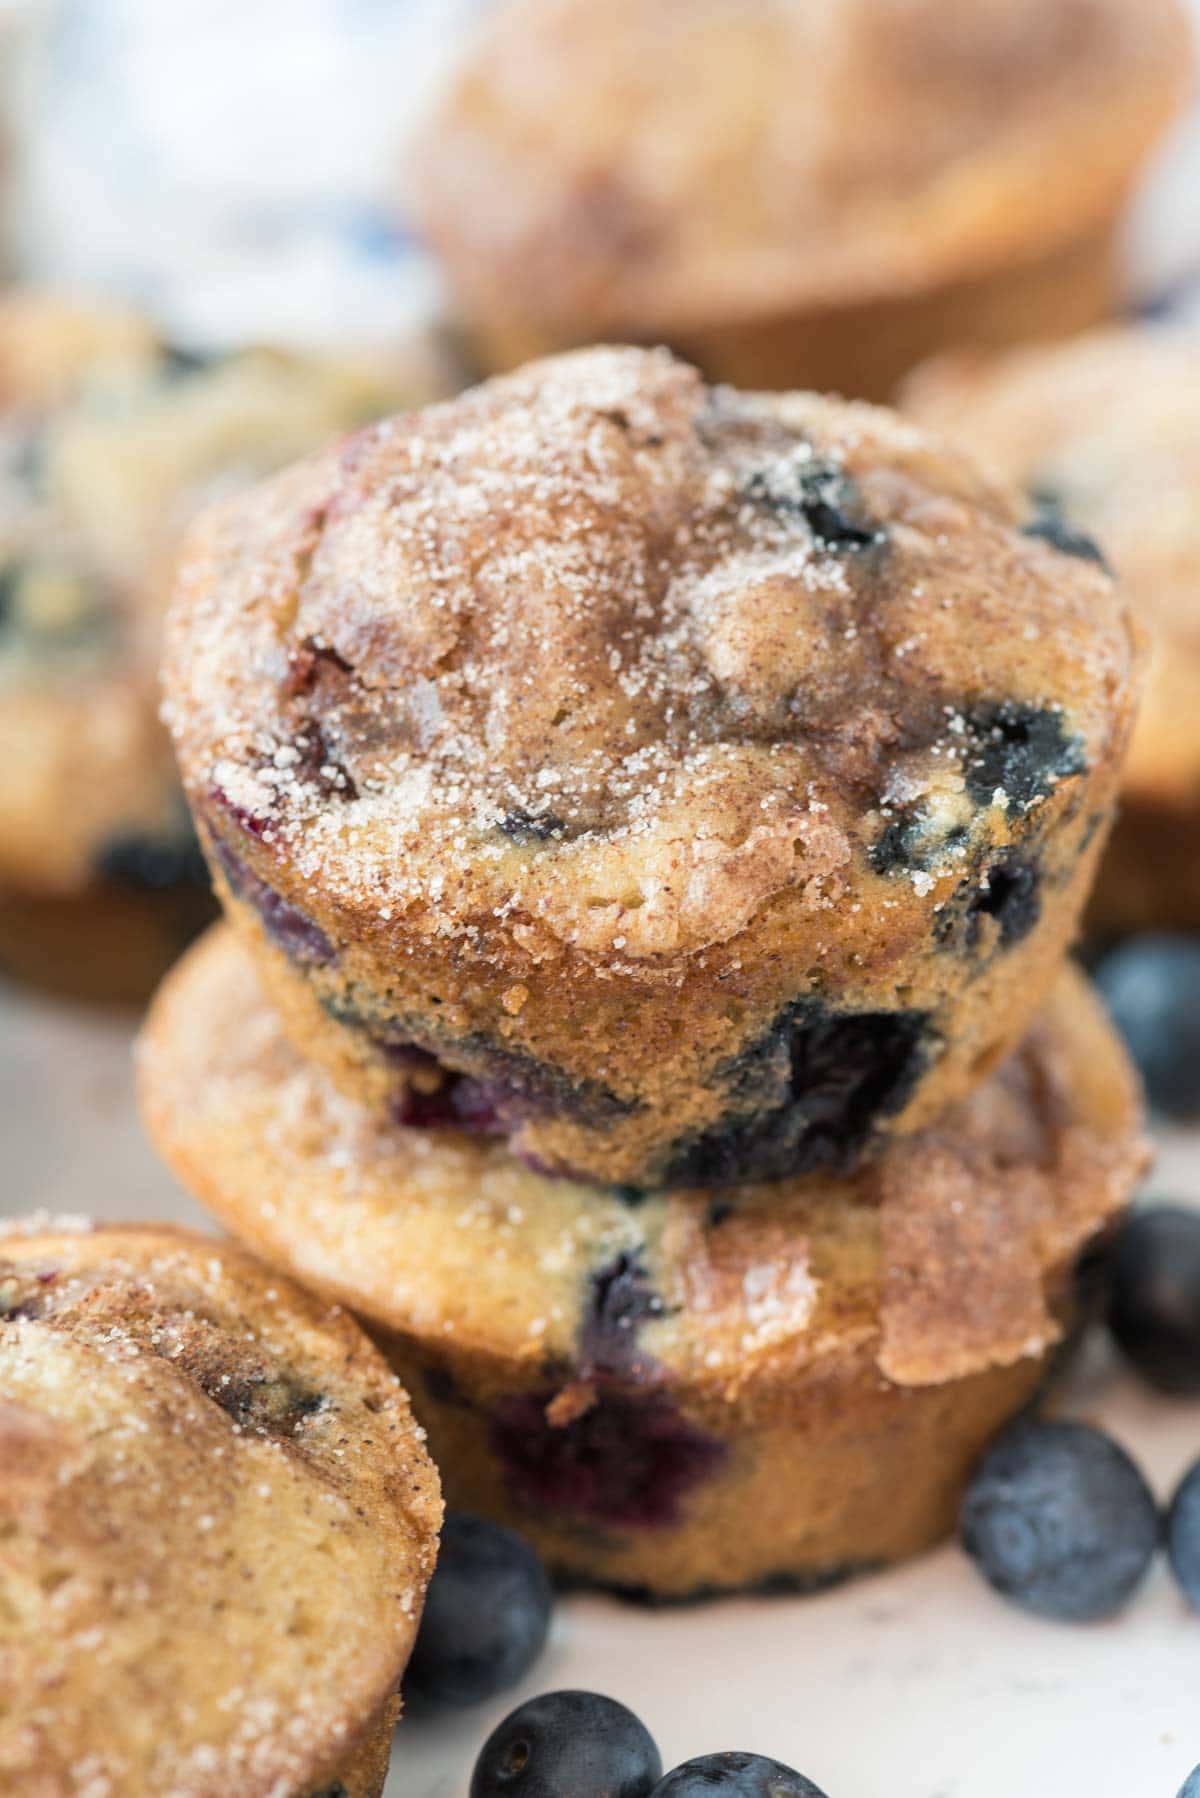 Banana Blueberry Muffins - this is an easy dairy-free blueberry muffin recipe that's also a banana muffin! They're the perfect breakfast.